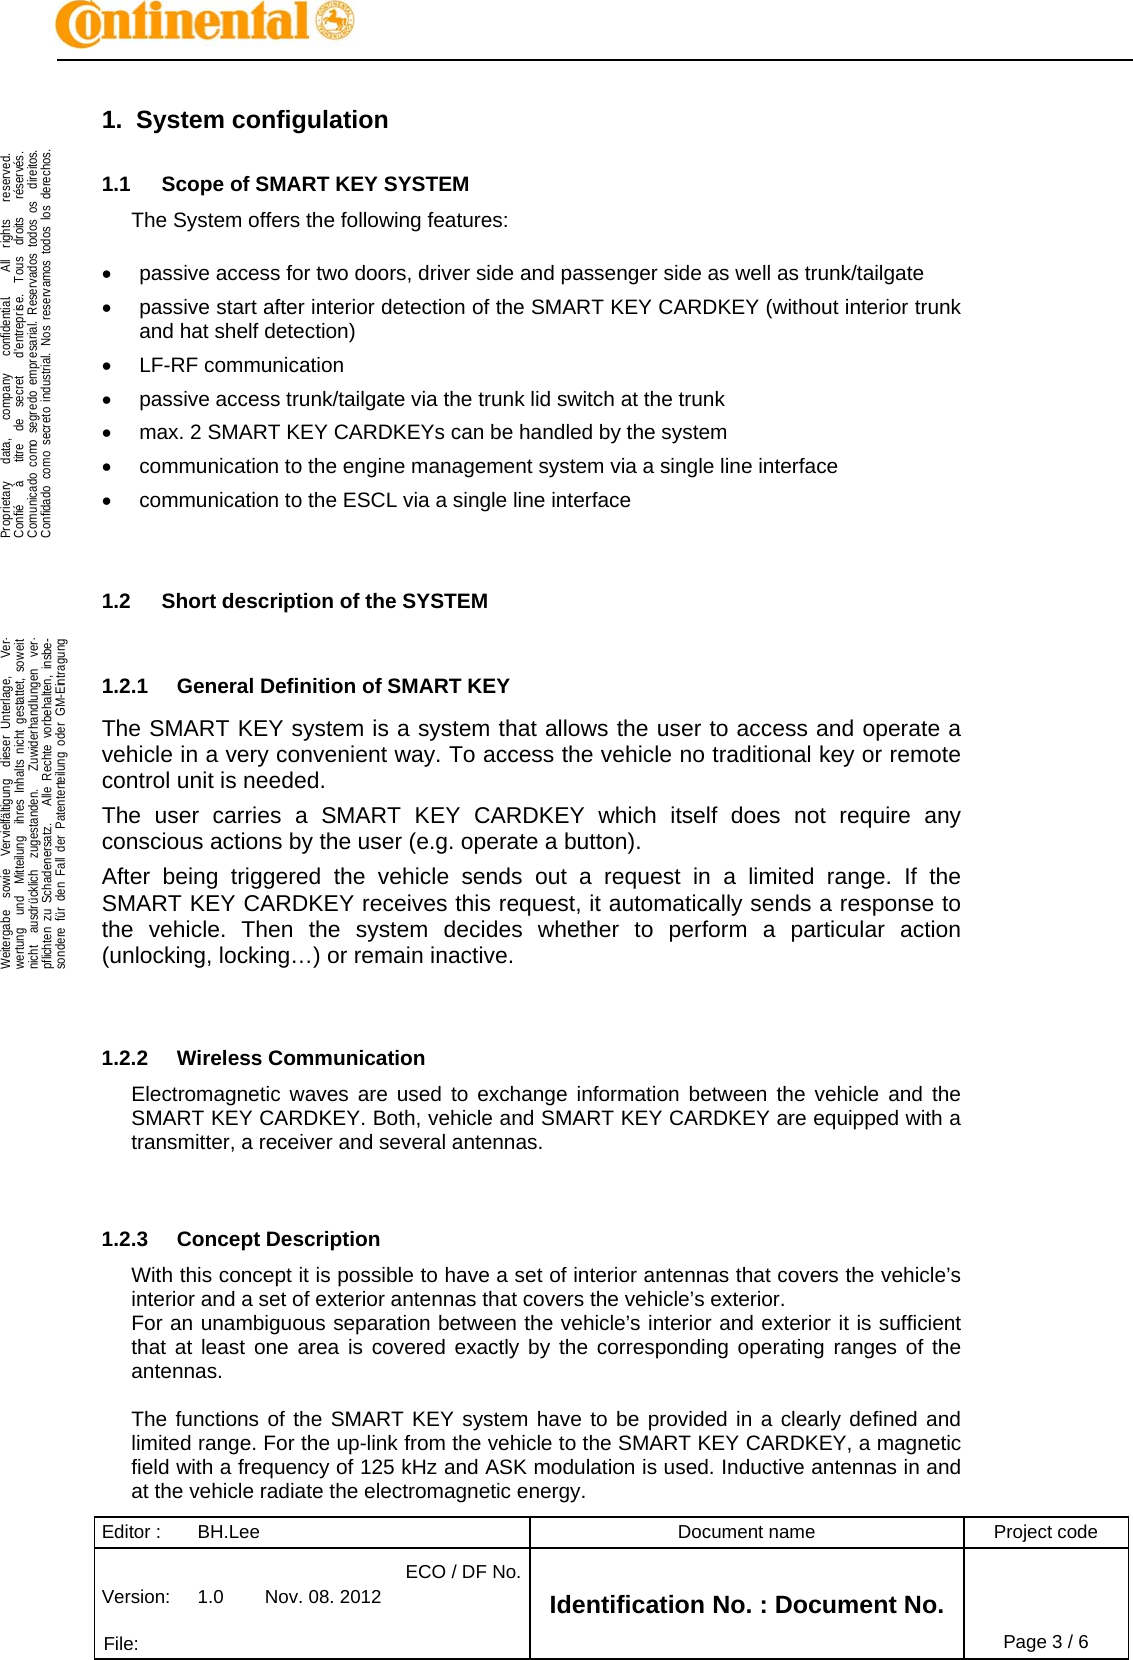 Editor :  BH.Lee  Document name  Project code Version:  1.0  Nov. 08. 2012 ECO / DF No.Identification No. : Document No.   File:   Page 3 / 6    .Proprietary   data,   company   confidential.    All  rights   reserved.Confié   à   titre  de  secret   d&apos;entreprise.  Tous  droits   réservés.Comunicado como segredo empresarial. Reservados todos os  direitos.Confidado como secreto industrial. Nos reservamos todos los derechos.  .Weitergabe  sowie  Vervielfältigung  dieser Unterlage,   Ver-wertung  und  Mitteilung  ihres Inhalts nicht gestattet, soweitnicht  ausdrücklich  zugestanden.   Zuwiderhandlungen  ver-pflichten zu Schadenersatz.   Alle Rechte vorbehalten, insbe-sondere für den Fall der Patenterteilung oder GM-Eintragung  1. System configulation 1.1  Scope of SMART KEY SYSTEM The System offers the following features:    passive access for two doors, driver side and passenger side as well as trunk/tailgate   passive start after interior detection of the SMART KEY CARDKEY (without interior trunk and hat shelf detection)  LF-RF communication    passive access trunk/tailgate via the trunk lid switch at the trunk   max. 2 SMART KEY CARDKEYs can be handled by the system   communication to the engine management system via a single line interface   communication to the ESCL via a single line interface   1.2  Short description of the SYSTEM  1.2.1  General Definition of SMART KEY The SMART KEY system is a system that allows the user to access and operate a vehicle in a very convenient way. To access the vehicle no traditional key or remote control unit is needed.  The user carries a SMART KEY CARDKEY which itself does not require any conscious actions by the user (e.g. operate a button).  After being triggered the vehicle sends out a request in a limited range. If the SMART KEY CARDKEY receives this request, it automatically sends a response to the vehicle. Then the system decides whether to perform a particular action (unlocking, locking…) or remain inactive.   1.2.2 Wireless Communication Electromagnetic waves are used to exchange information between the vehicle and the SMART KEY CARDKEY. Both, vehicle and SMART KEY CARDKEY are equipped with a transmitter, a receiver and several antennas.    1.2.3 Concept Description With this concept it is possible to have a set of interior antennas that covers the vehicle’s interior and a set of exterior antennas that covers the vehicle’s exterior. For an unambiguous separation between the vehicle’s interior and exterior it is sufficient that at least one area is covered exactly by the corresponding operating ranges of the antennas.  The functions of the SMART KEY system have to be provided in a clearly defined and limited range. For the up-link from the vehicle to the SMART KEY CARDKEY, a magnetic field with a frequency of 125 kHz and ASK modulation is used. Inductive antennas in and at the vehicle radiate the electromagnetic energy. 